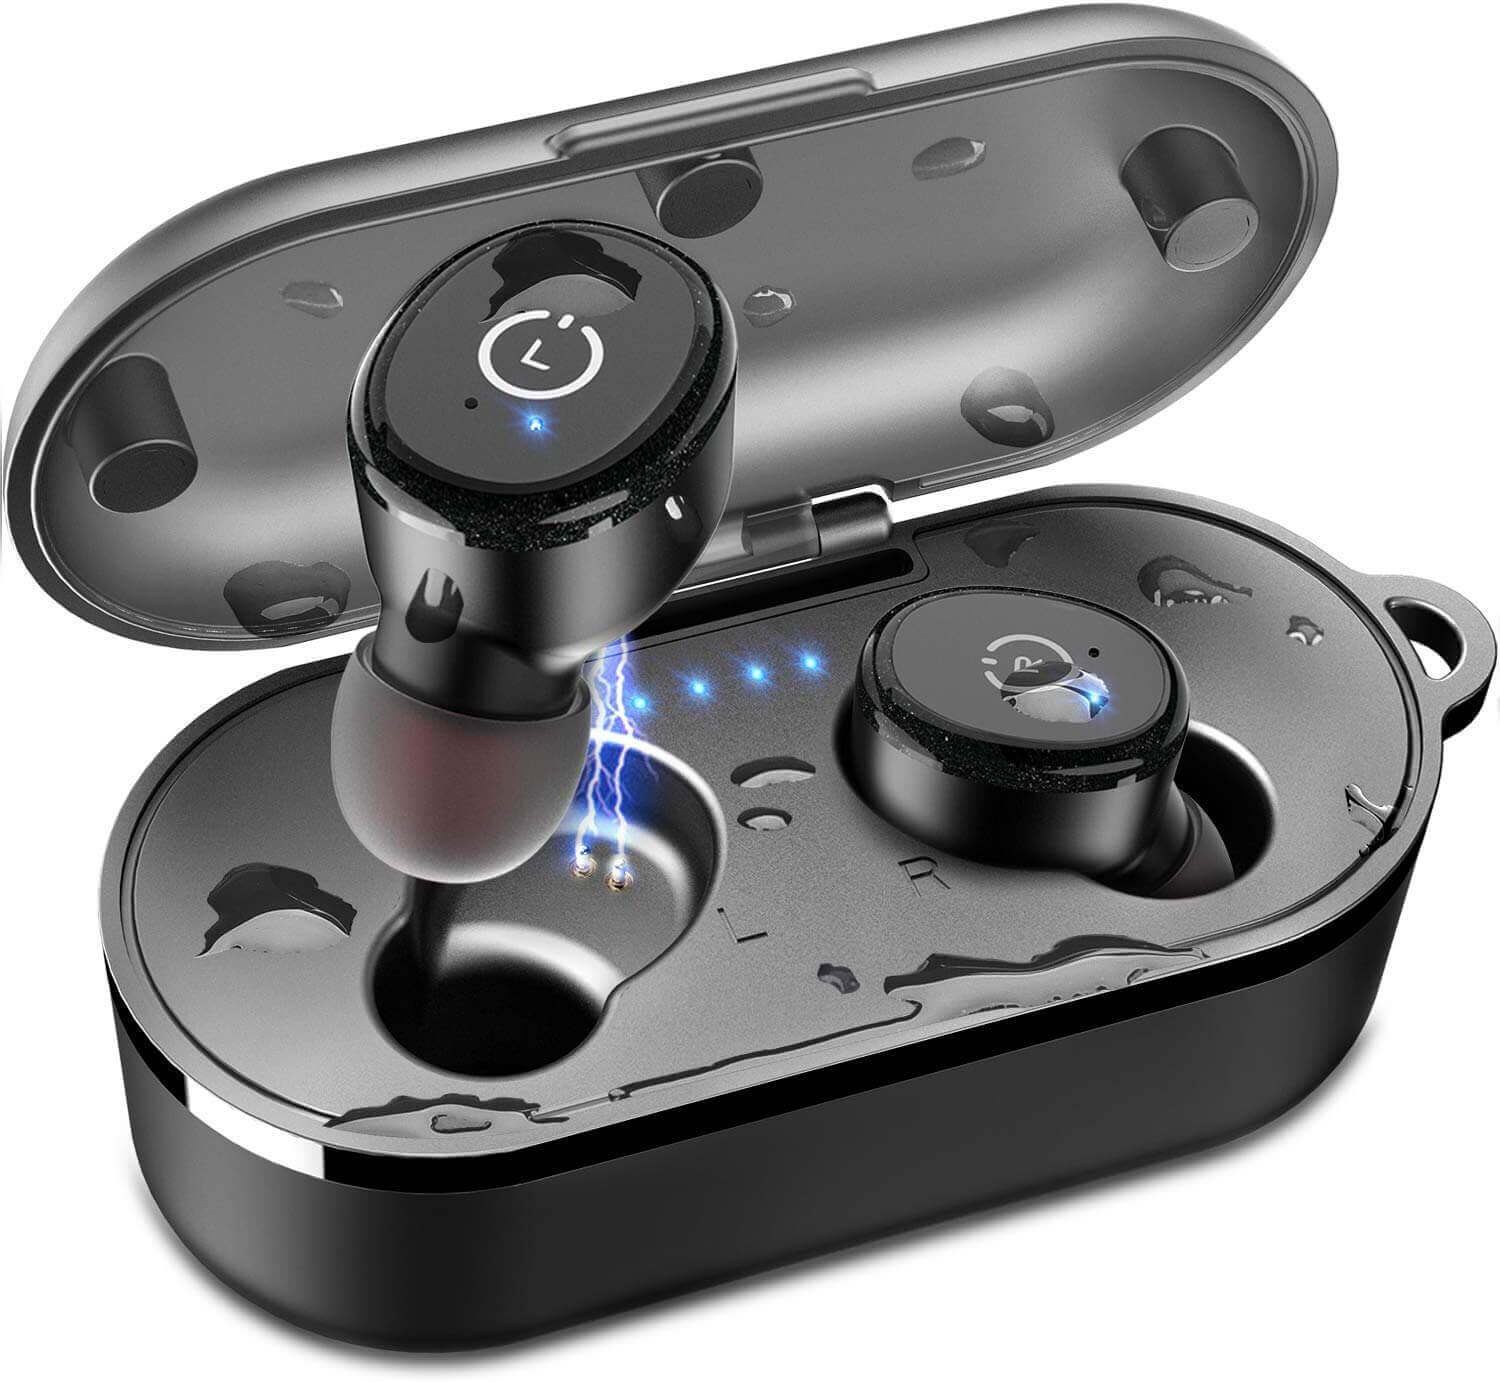 This is the $49.99 TOZO T10 wireless earbuds with Bluetooth 5.0